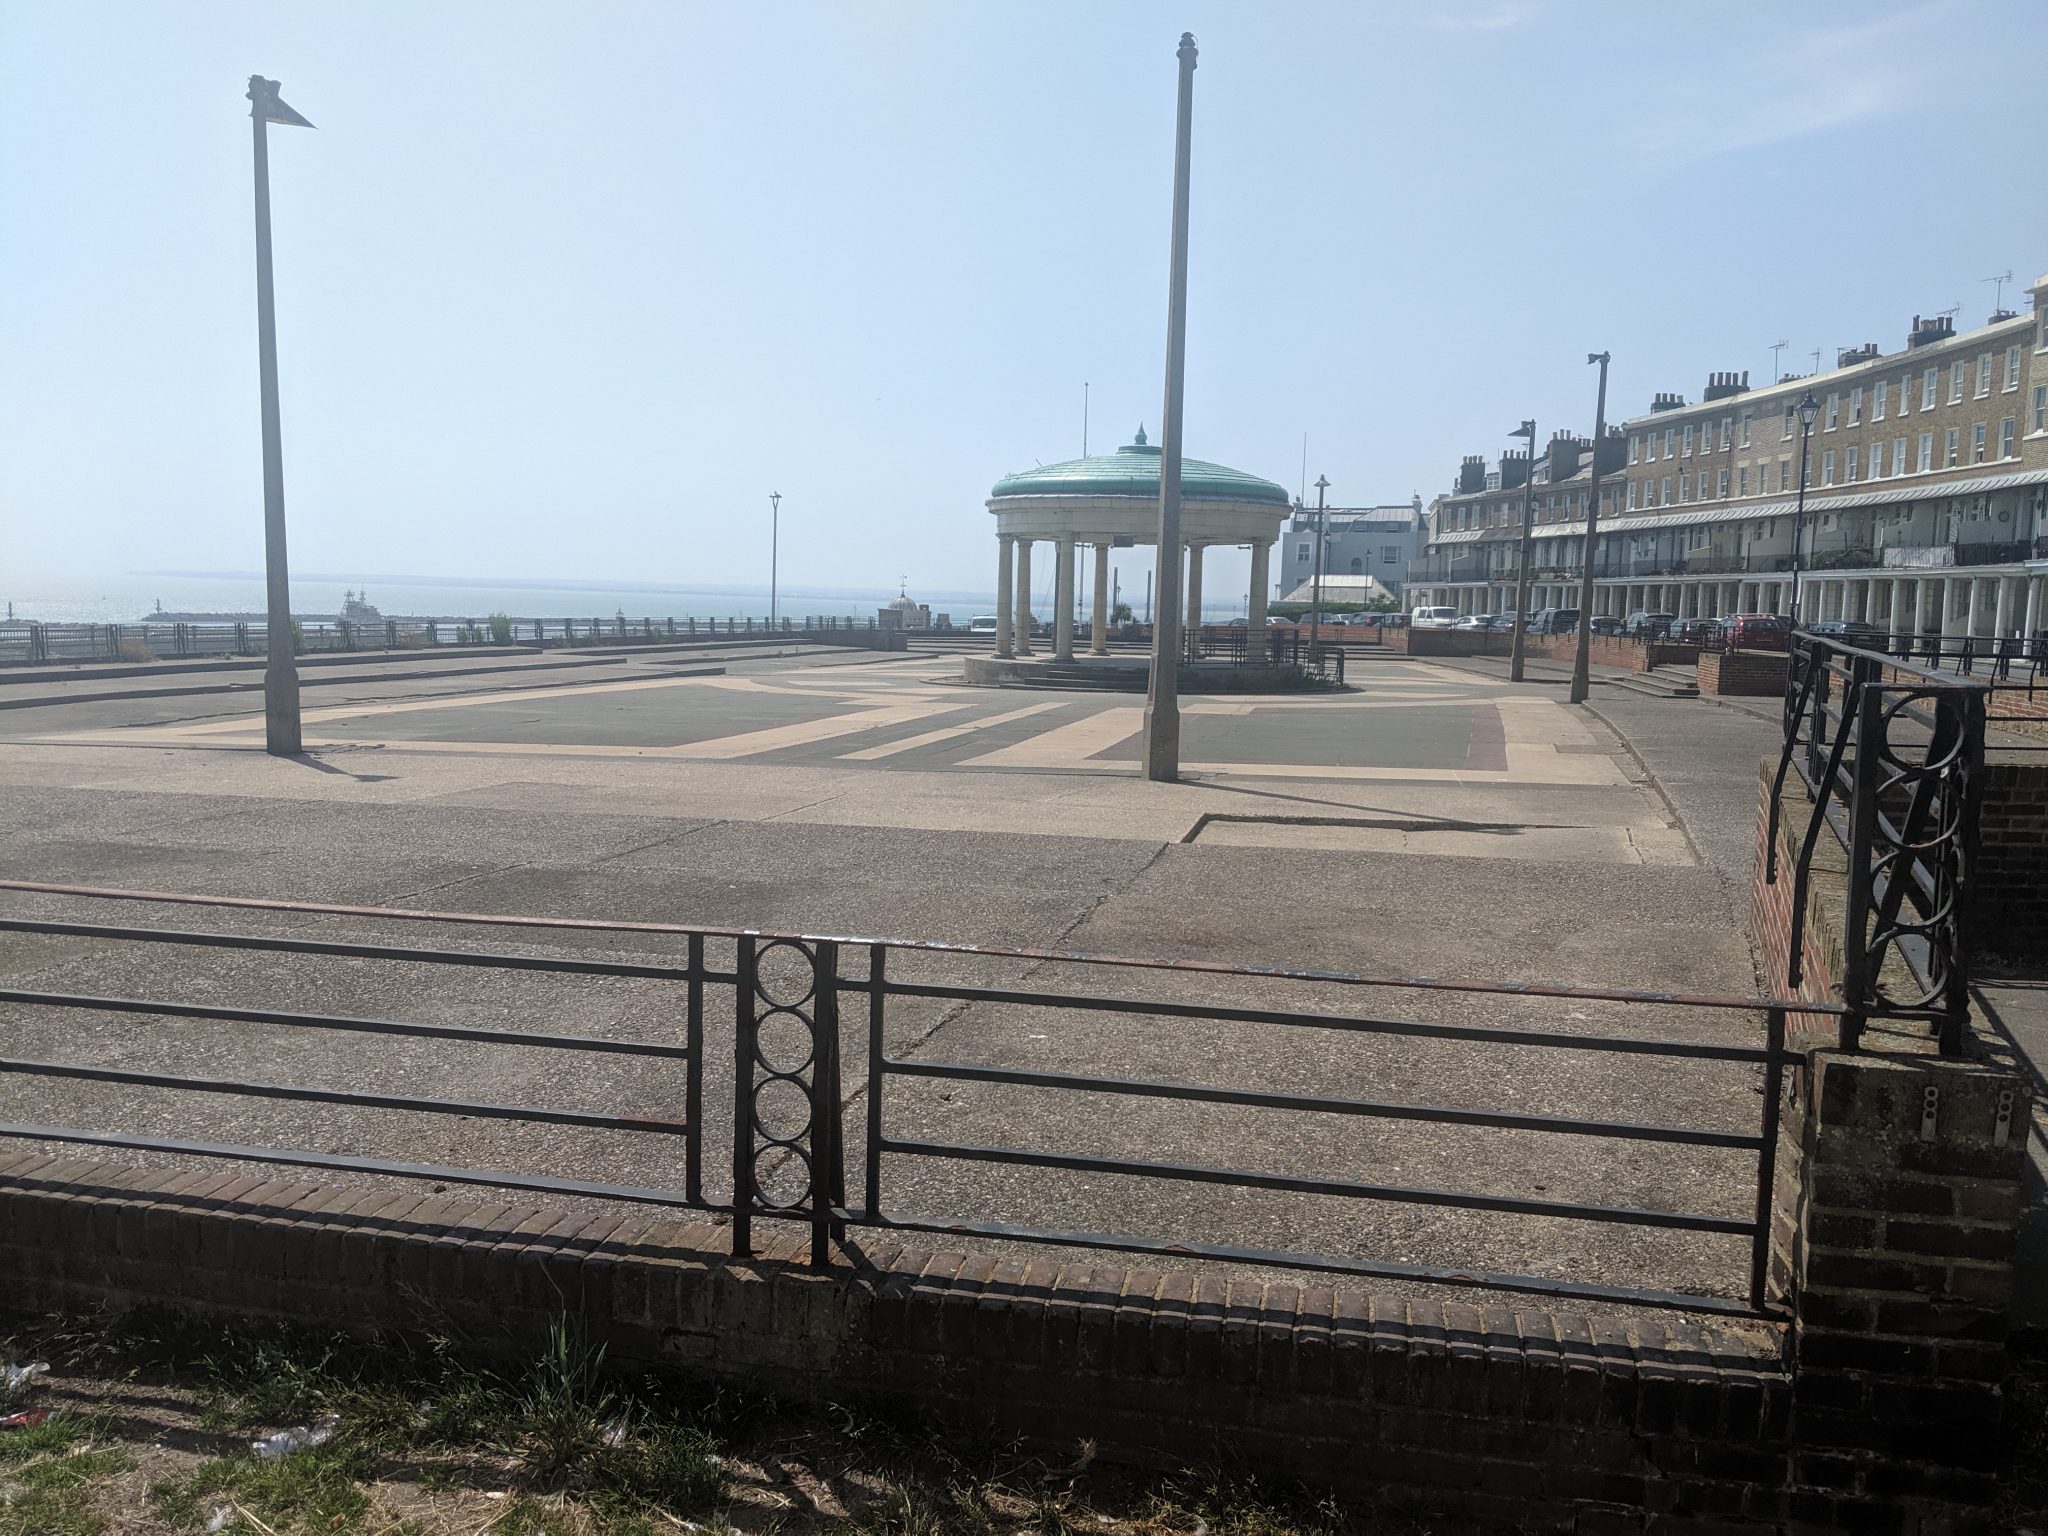 Paved area surrounding the Eastcliff Bandstand